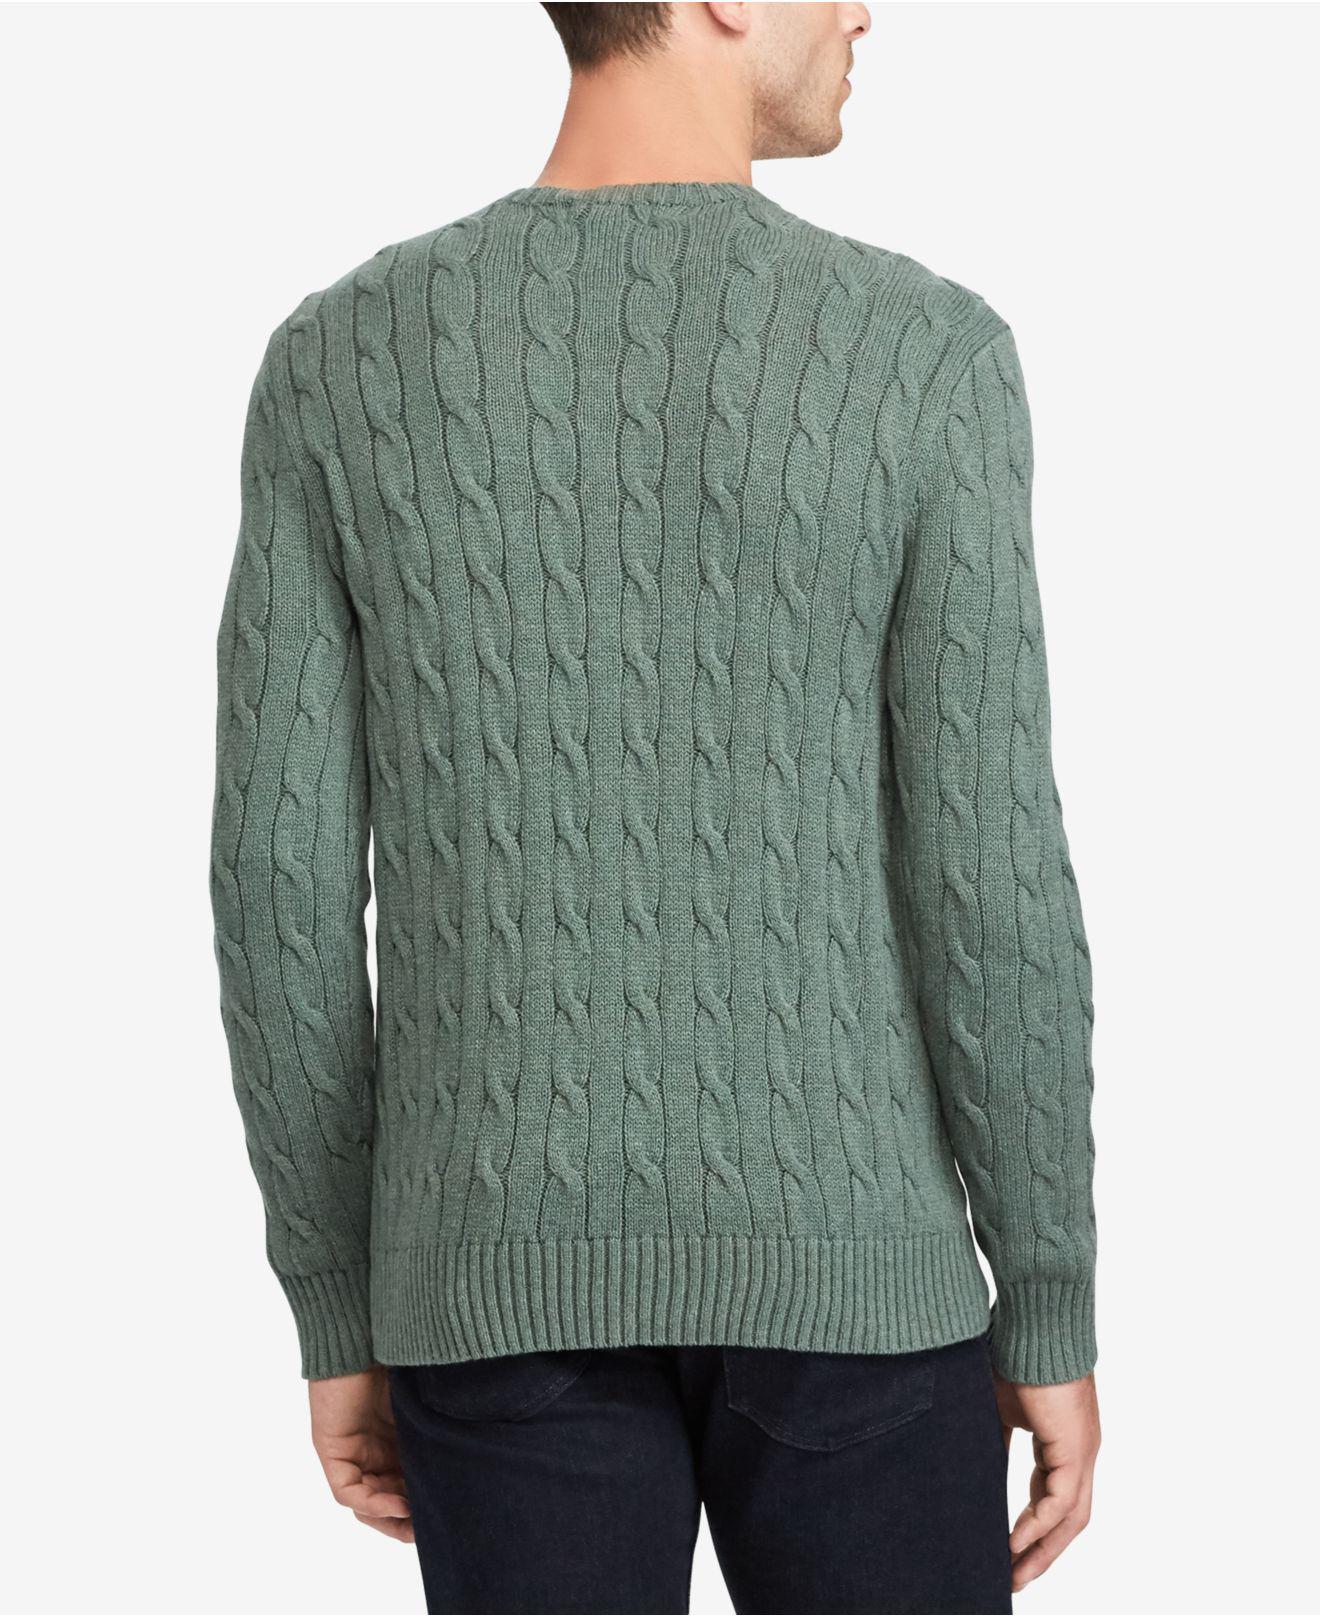 Polo Ralph Lauren Cotton Men's Cable-knit Sweater in Green for Men - Lyst